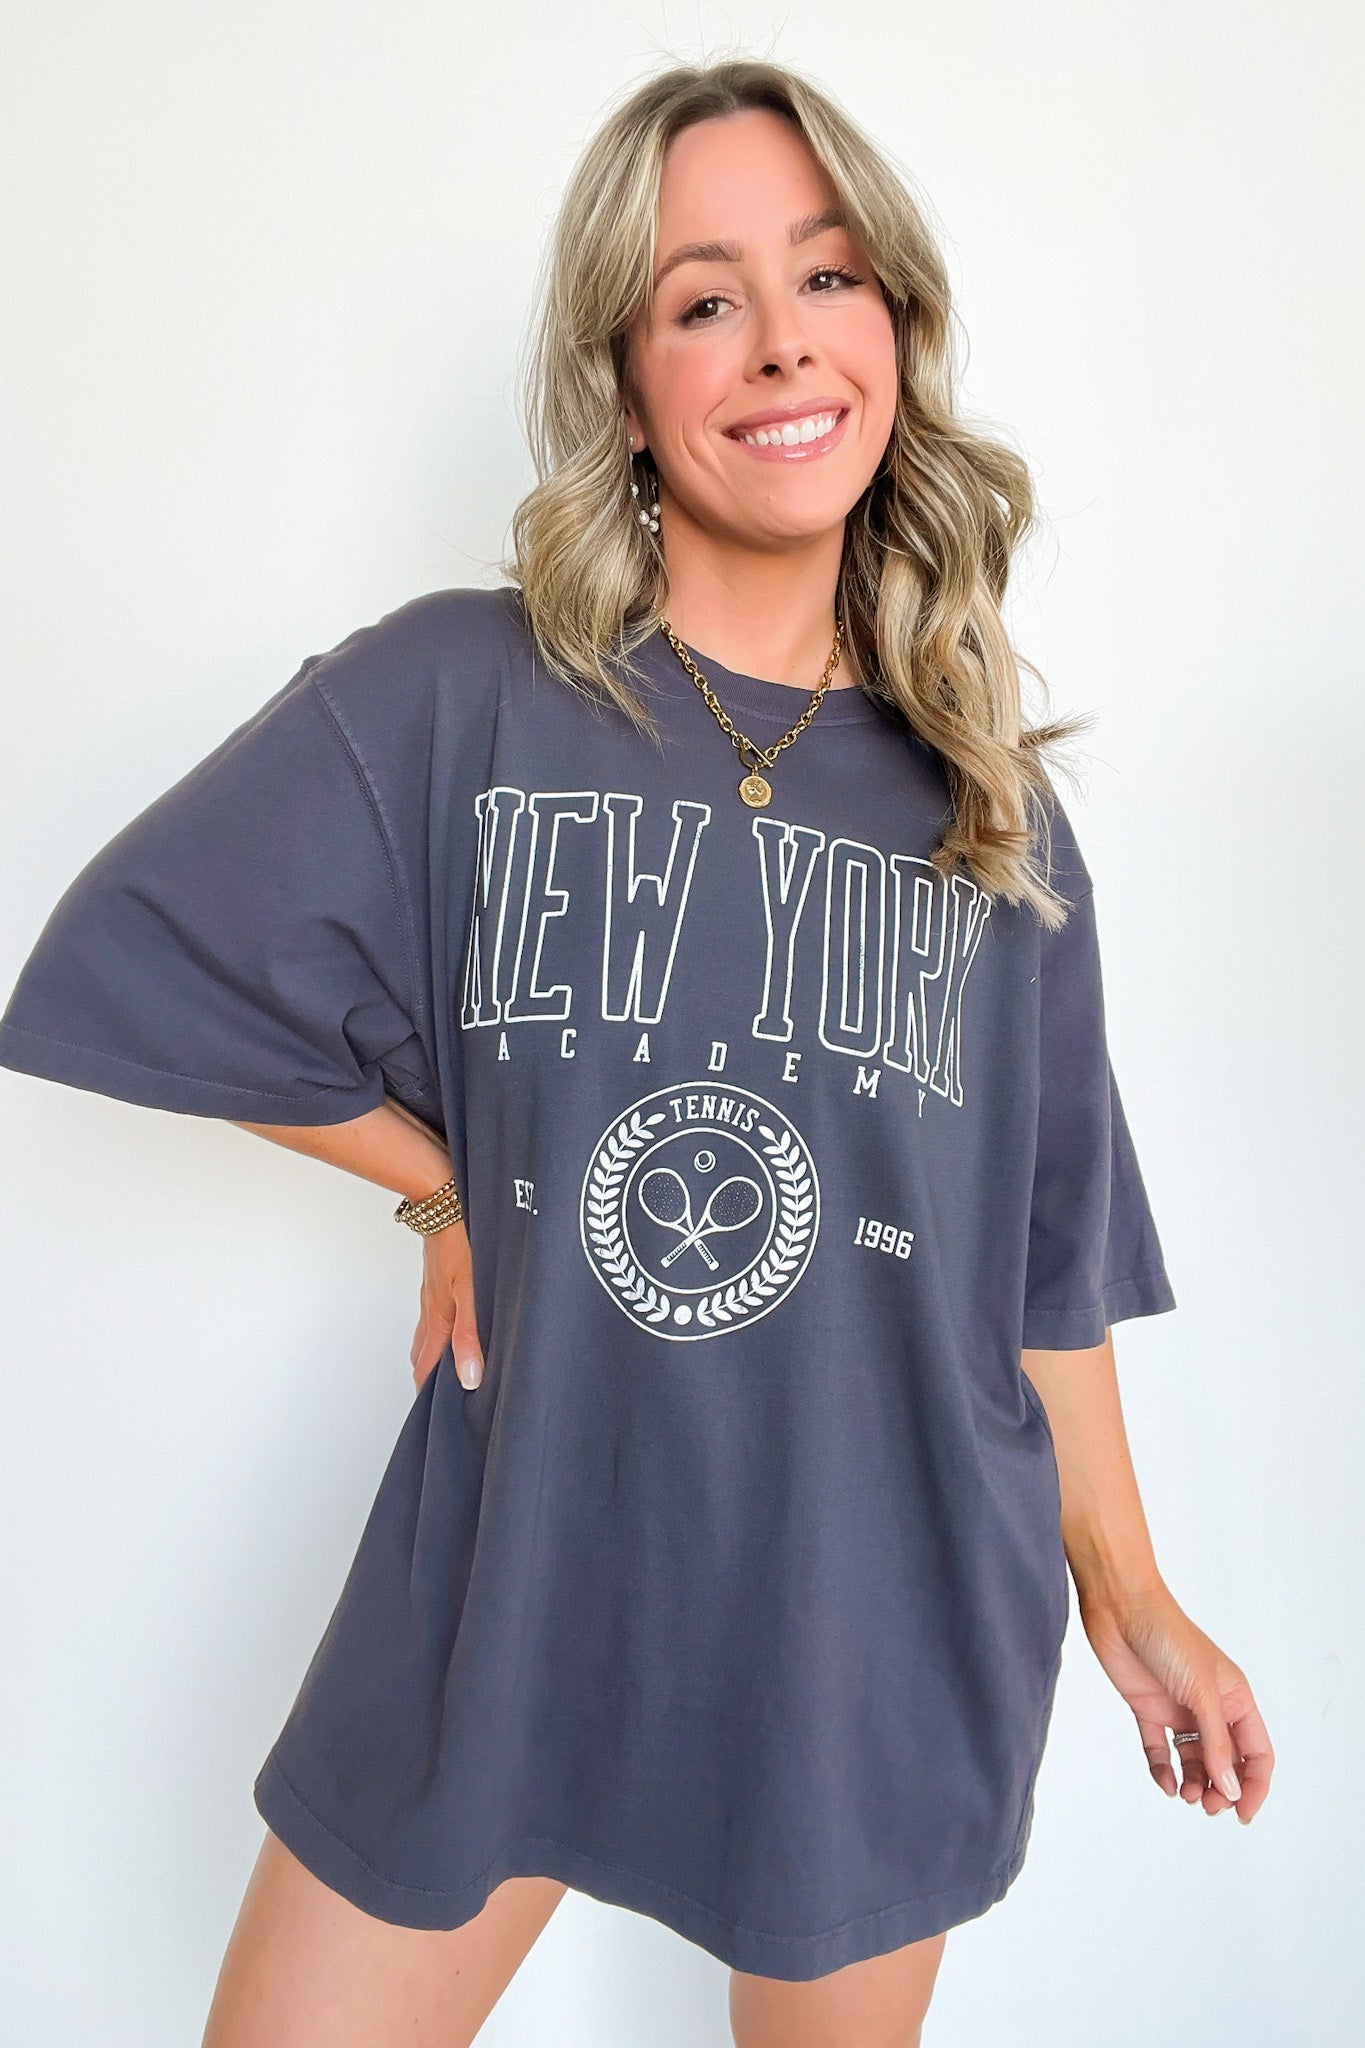 SM / Charcoal New York Academy Vintage Graphic Tee - Madison and Mallory